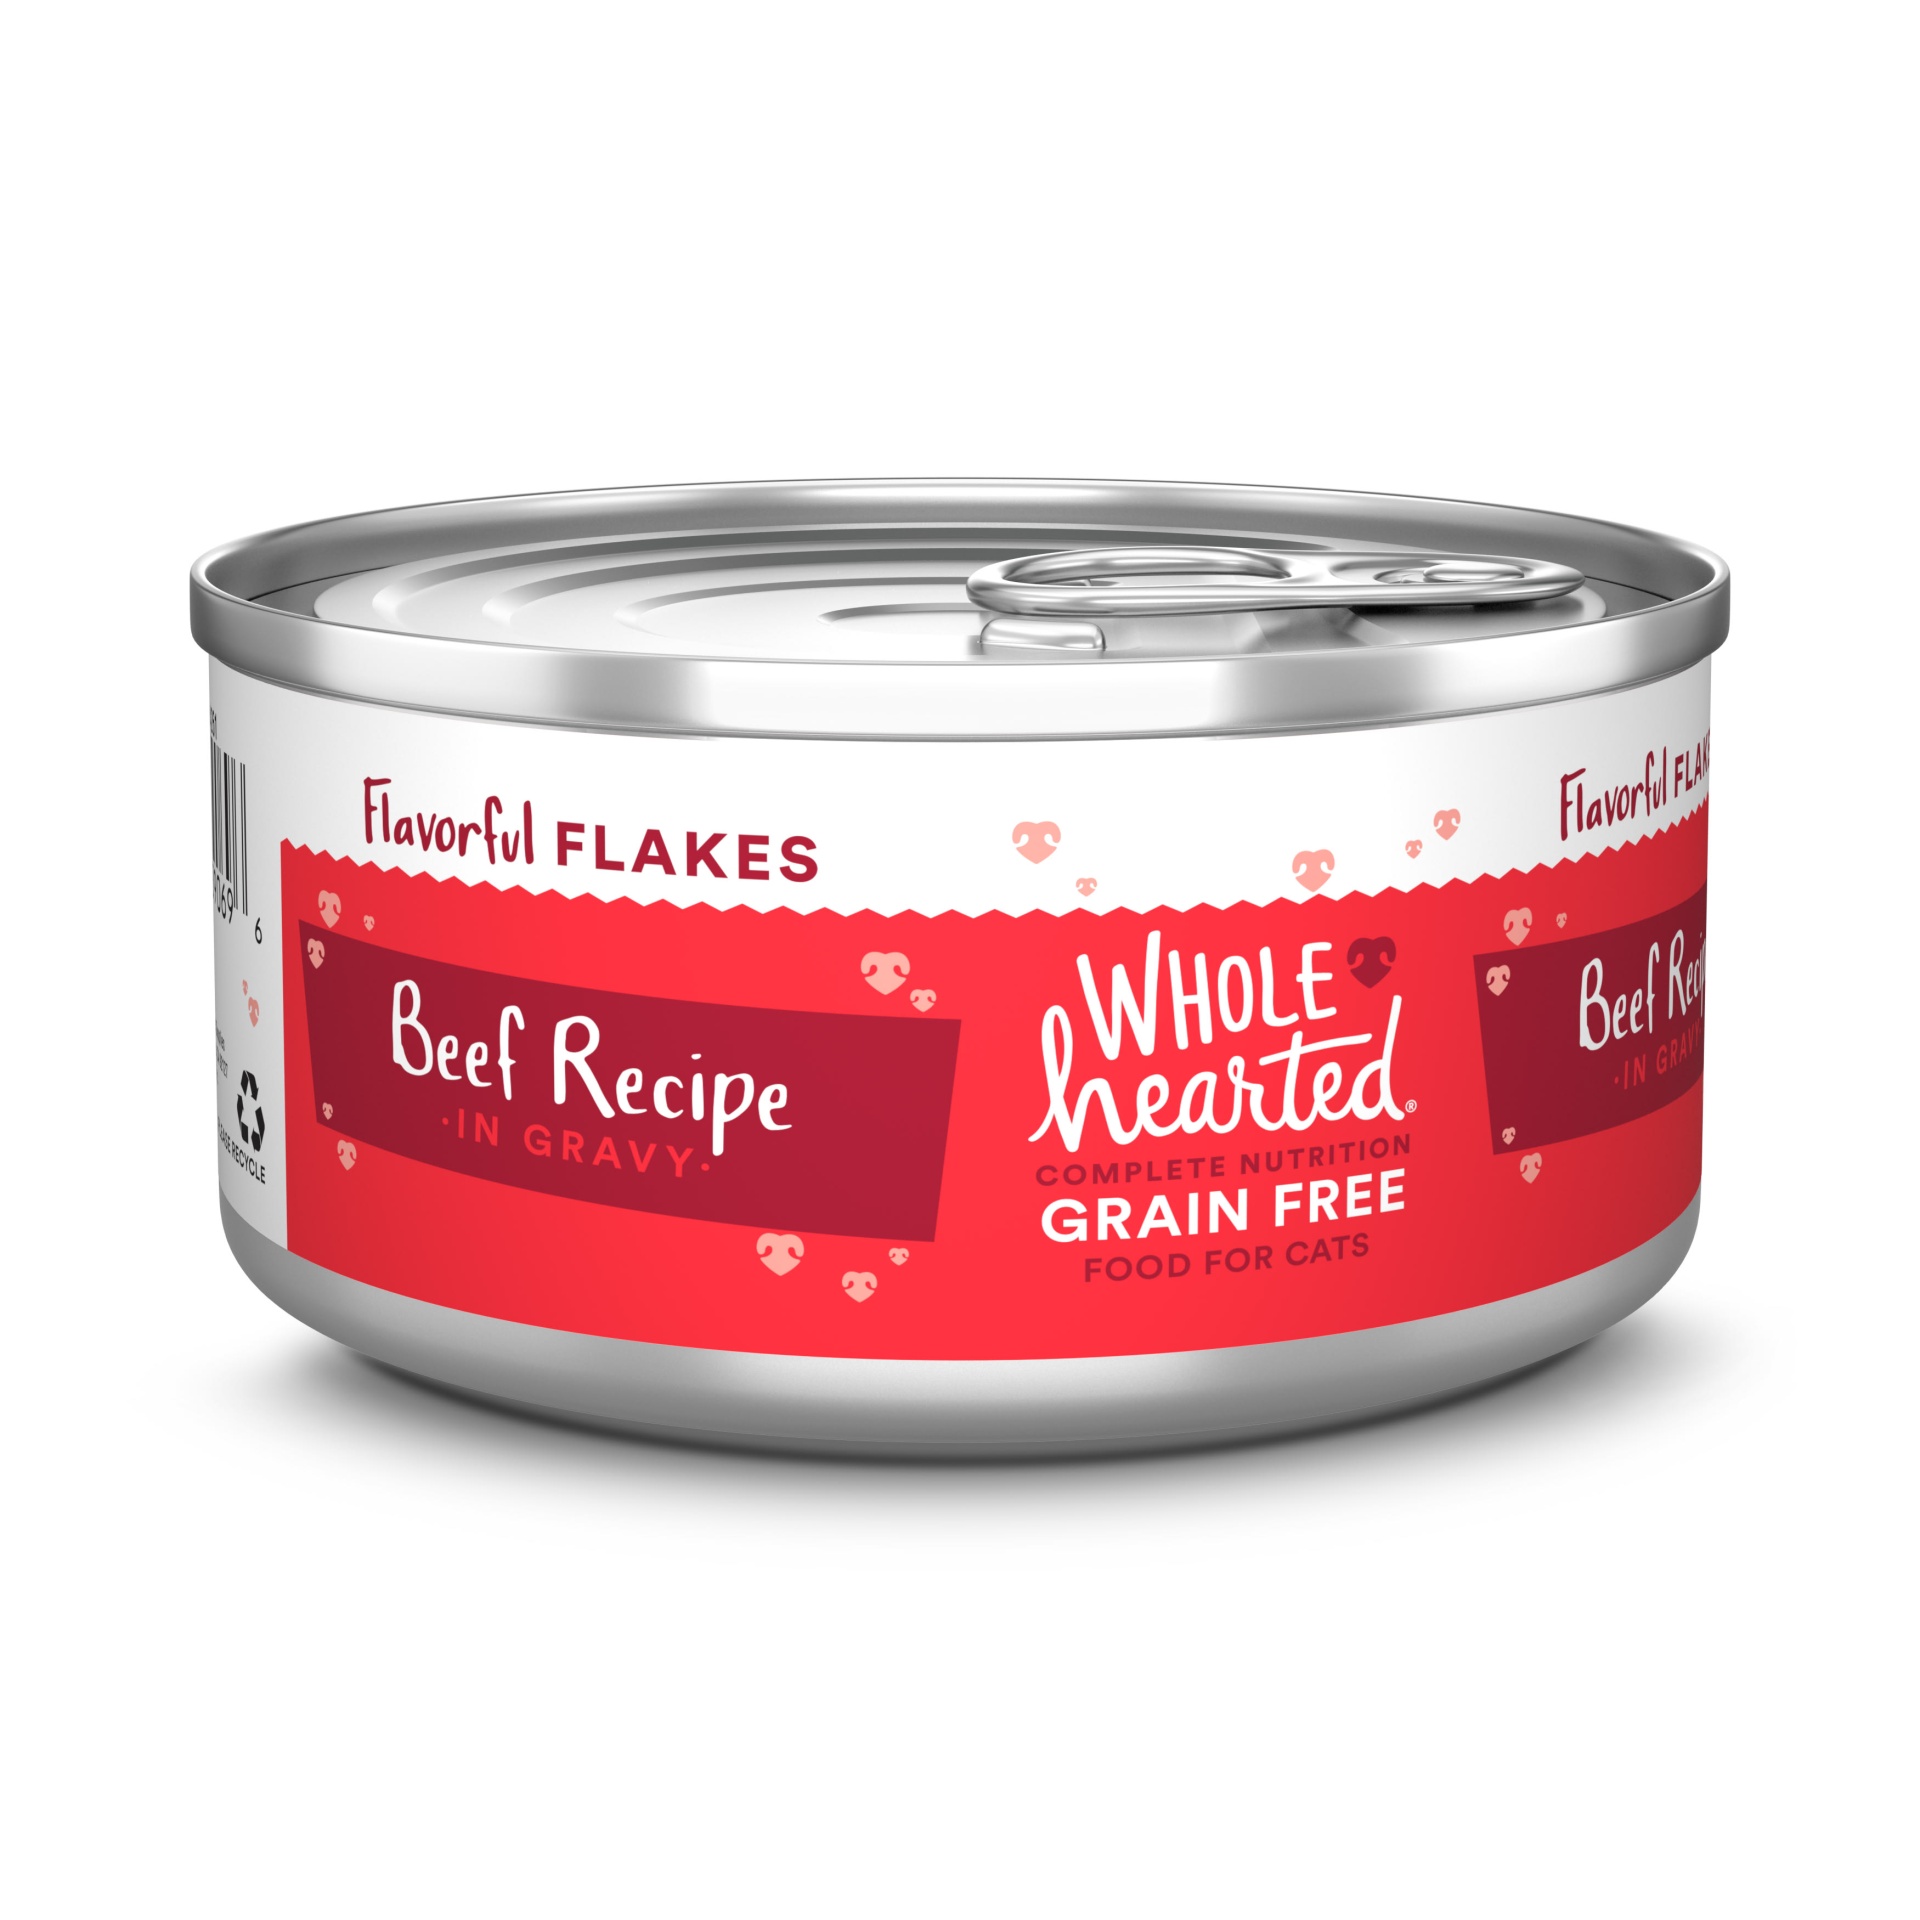 slide 1 of 1, WholeHearted Grain Free Beef Recipe Flaked Wet Cat Food for All Life Stages, 5.5 oz